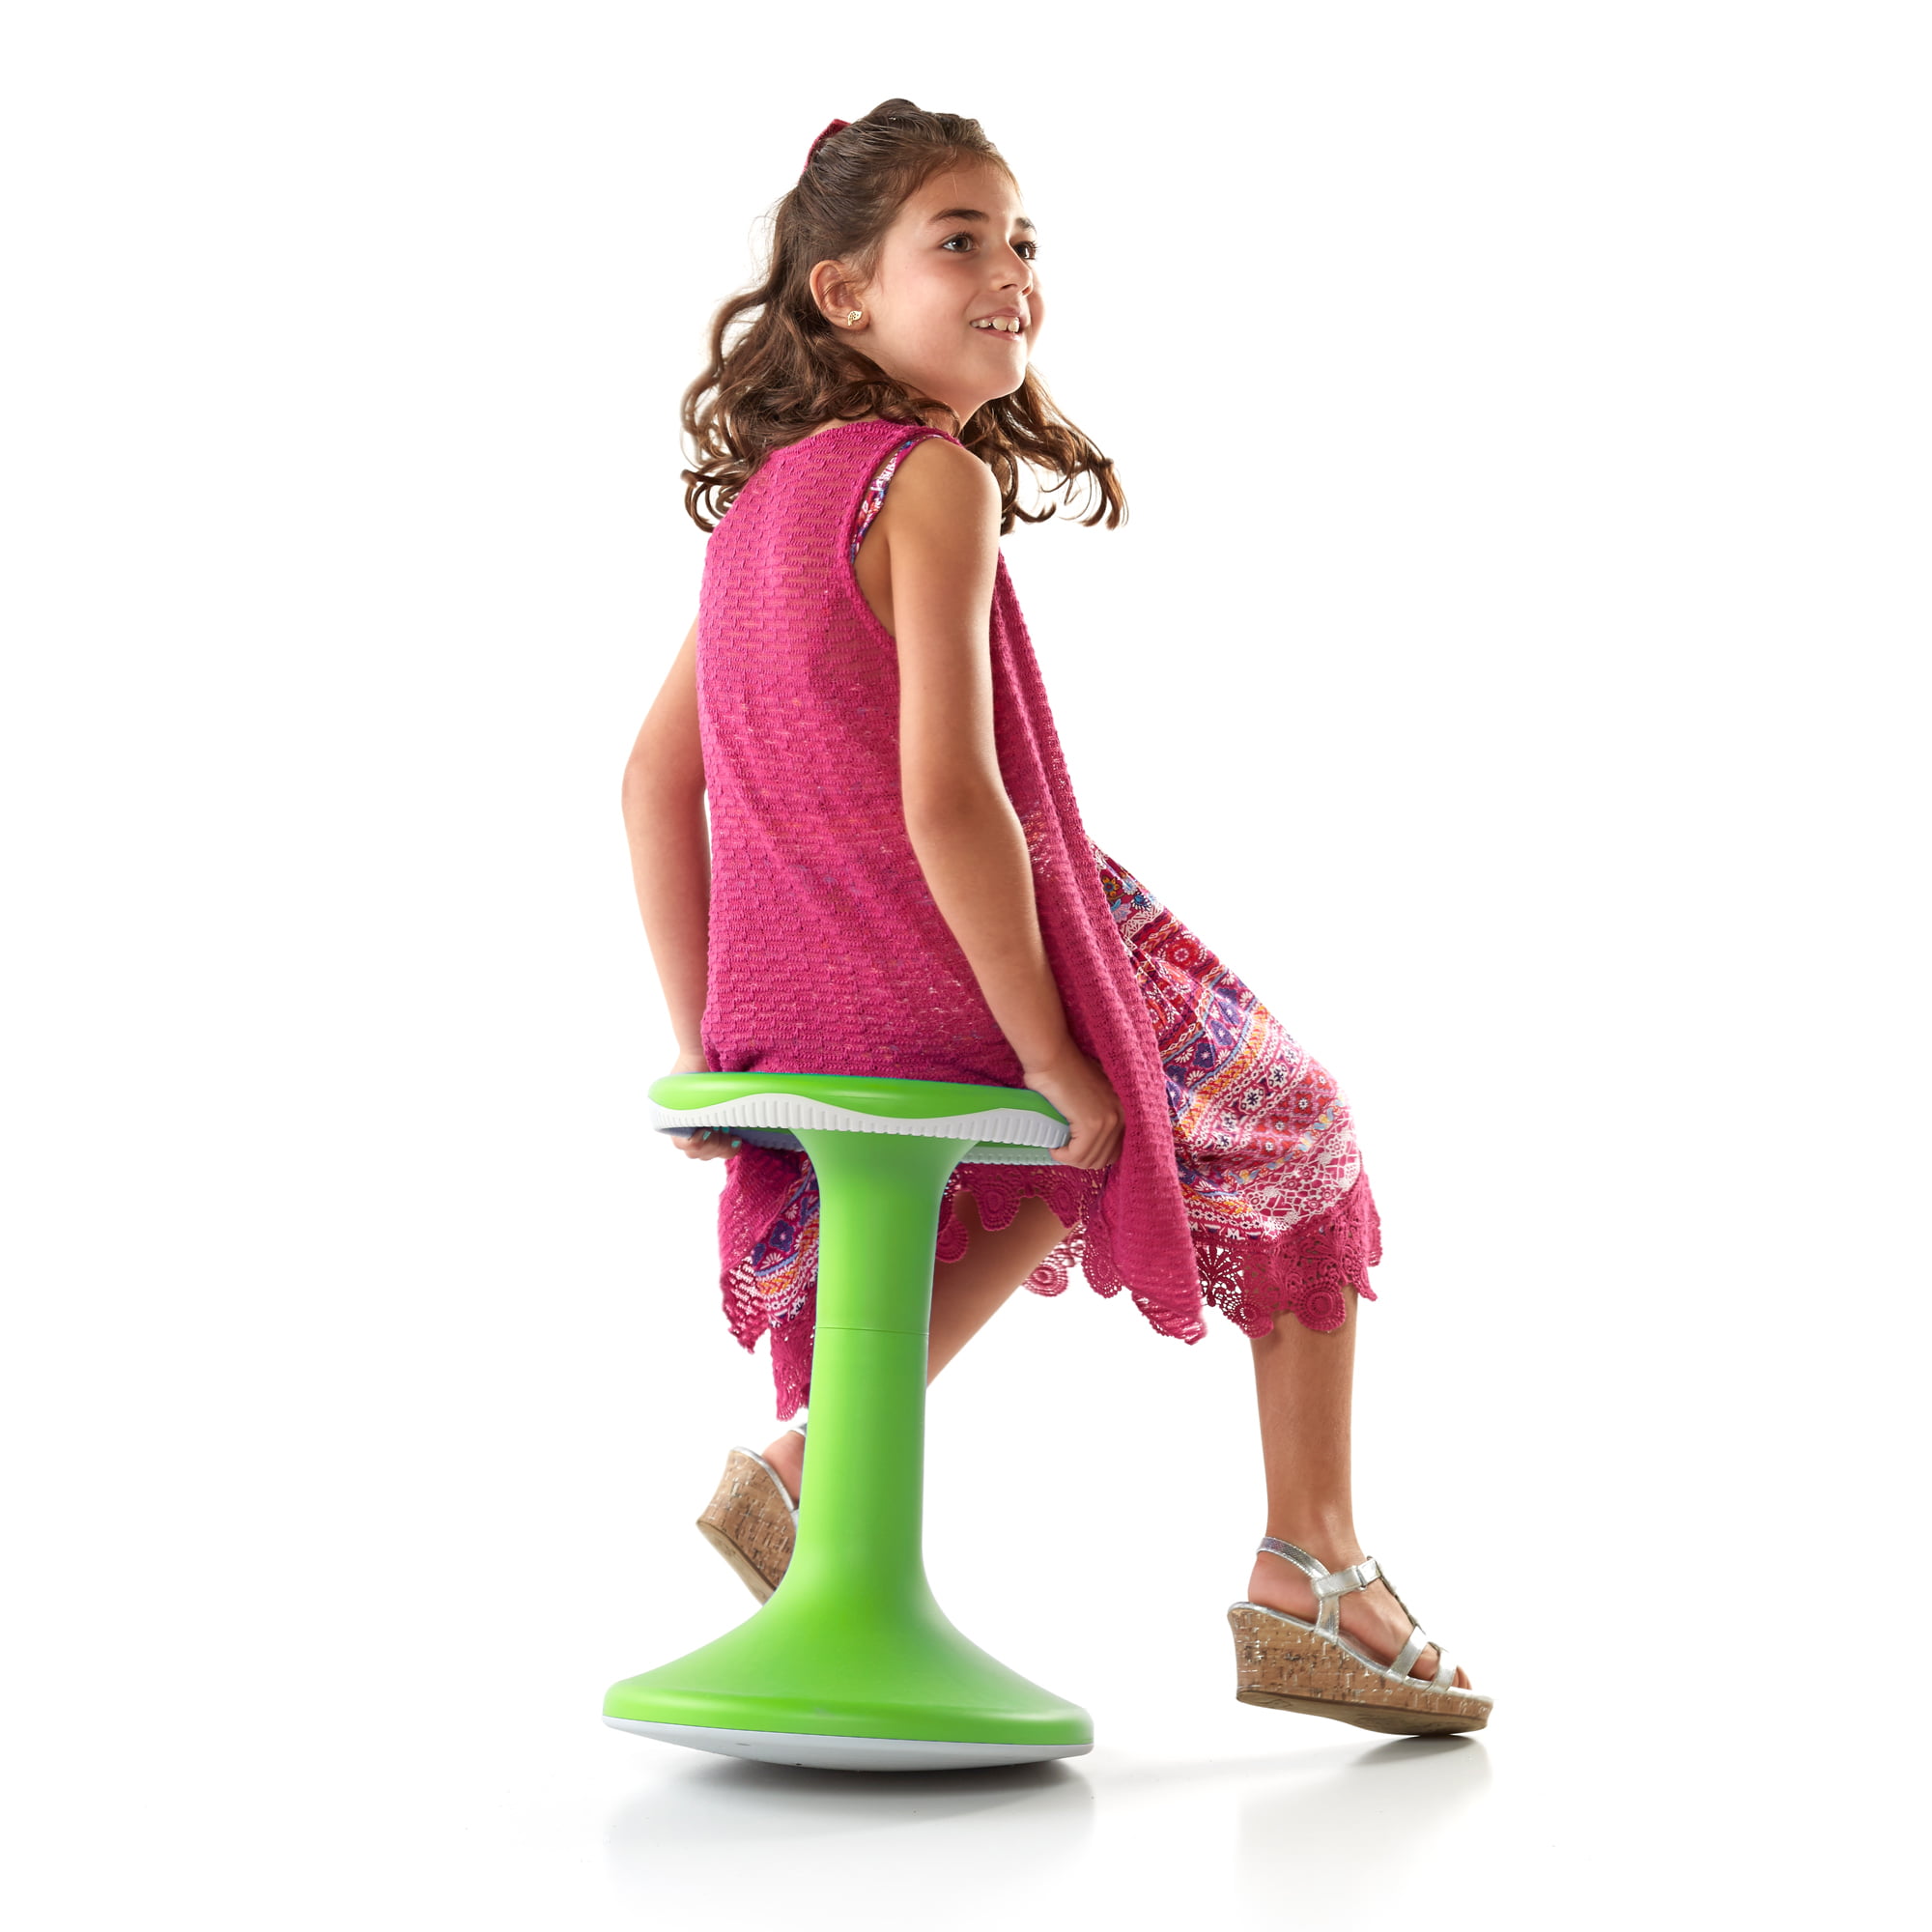 Kids Wiggle Chair and Active Core Engagement Wobble Stool for Desks and Tables with 360 Degree Movement Guidecraft 12-inch Motion Stool Green Classroom and Home Learning Seating